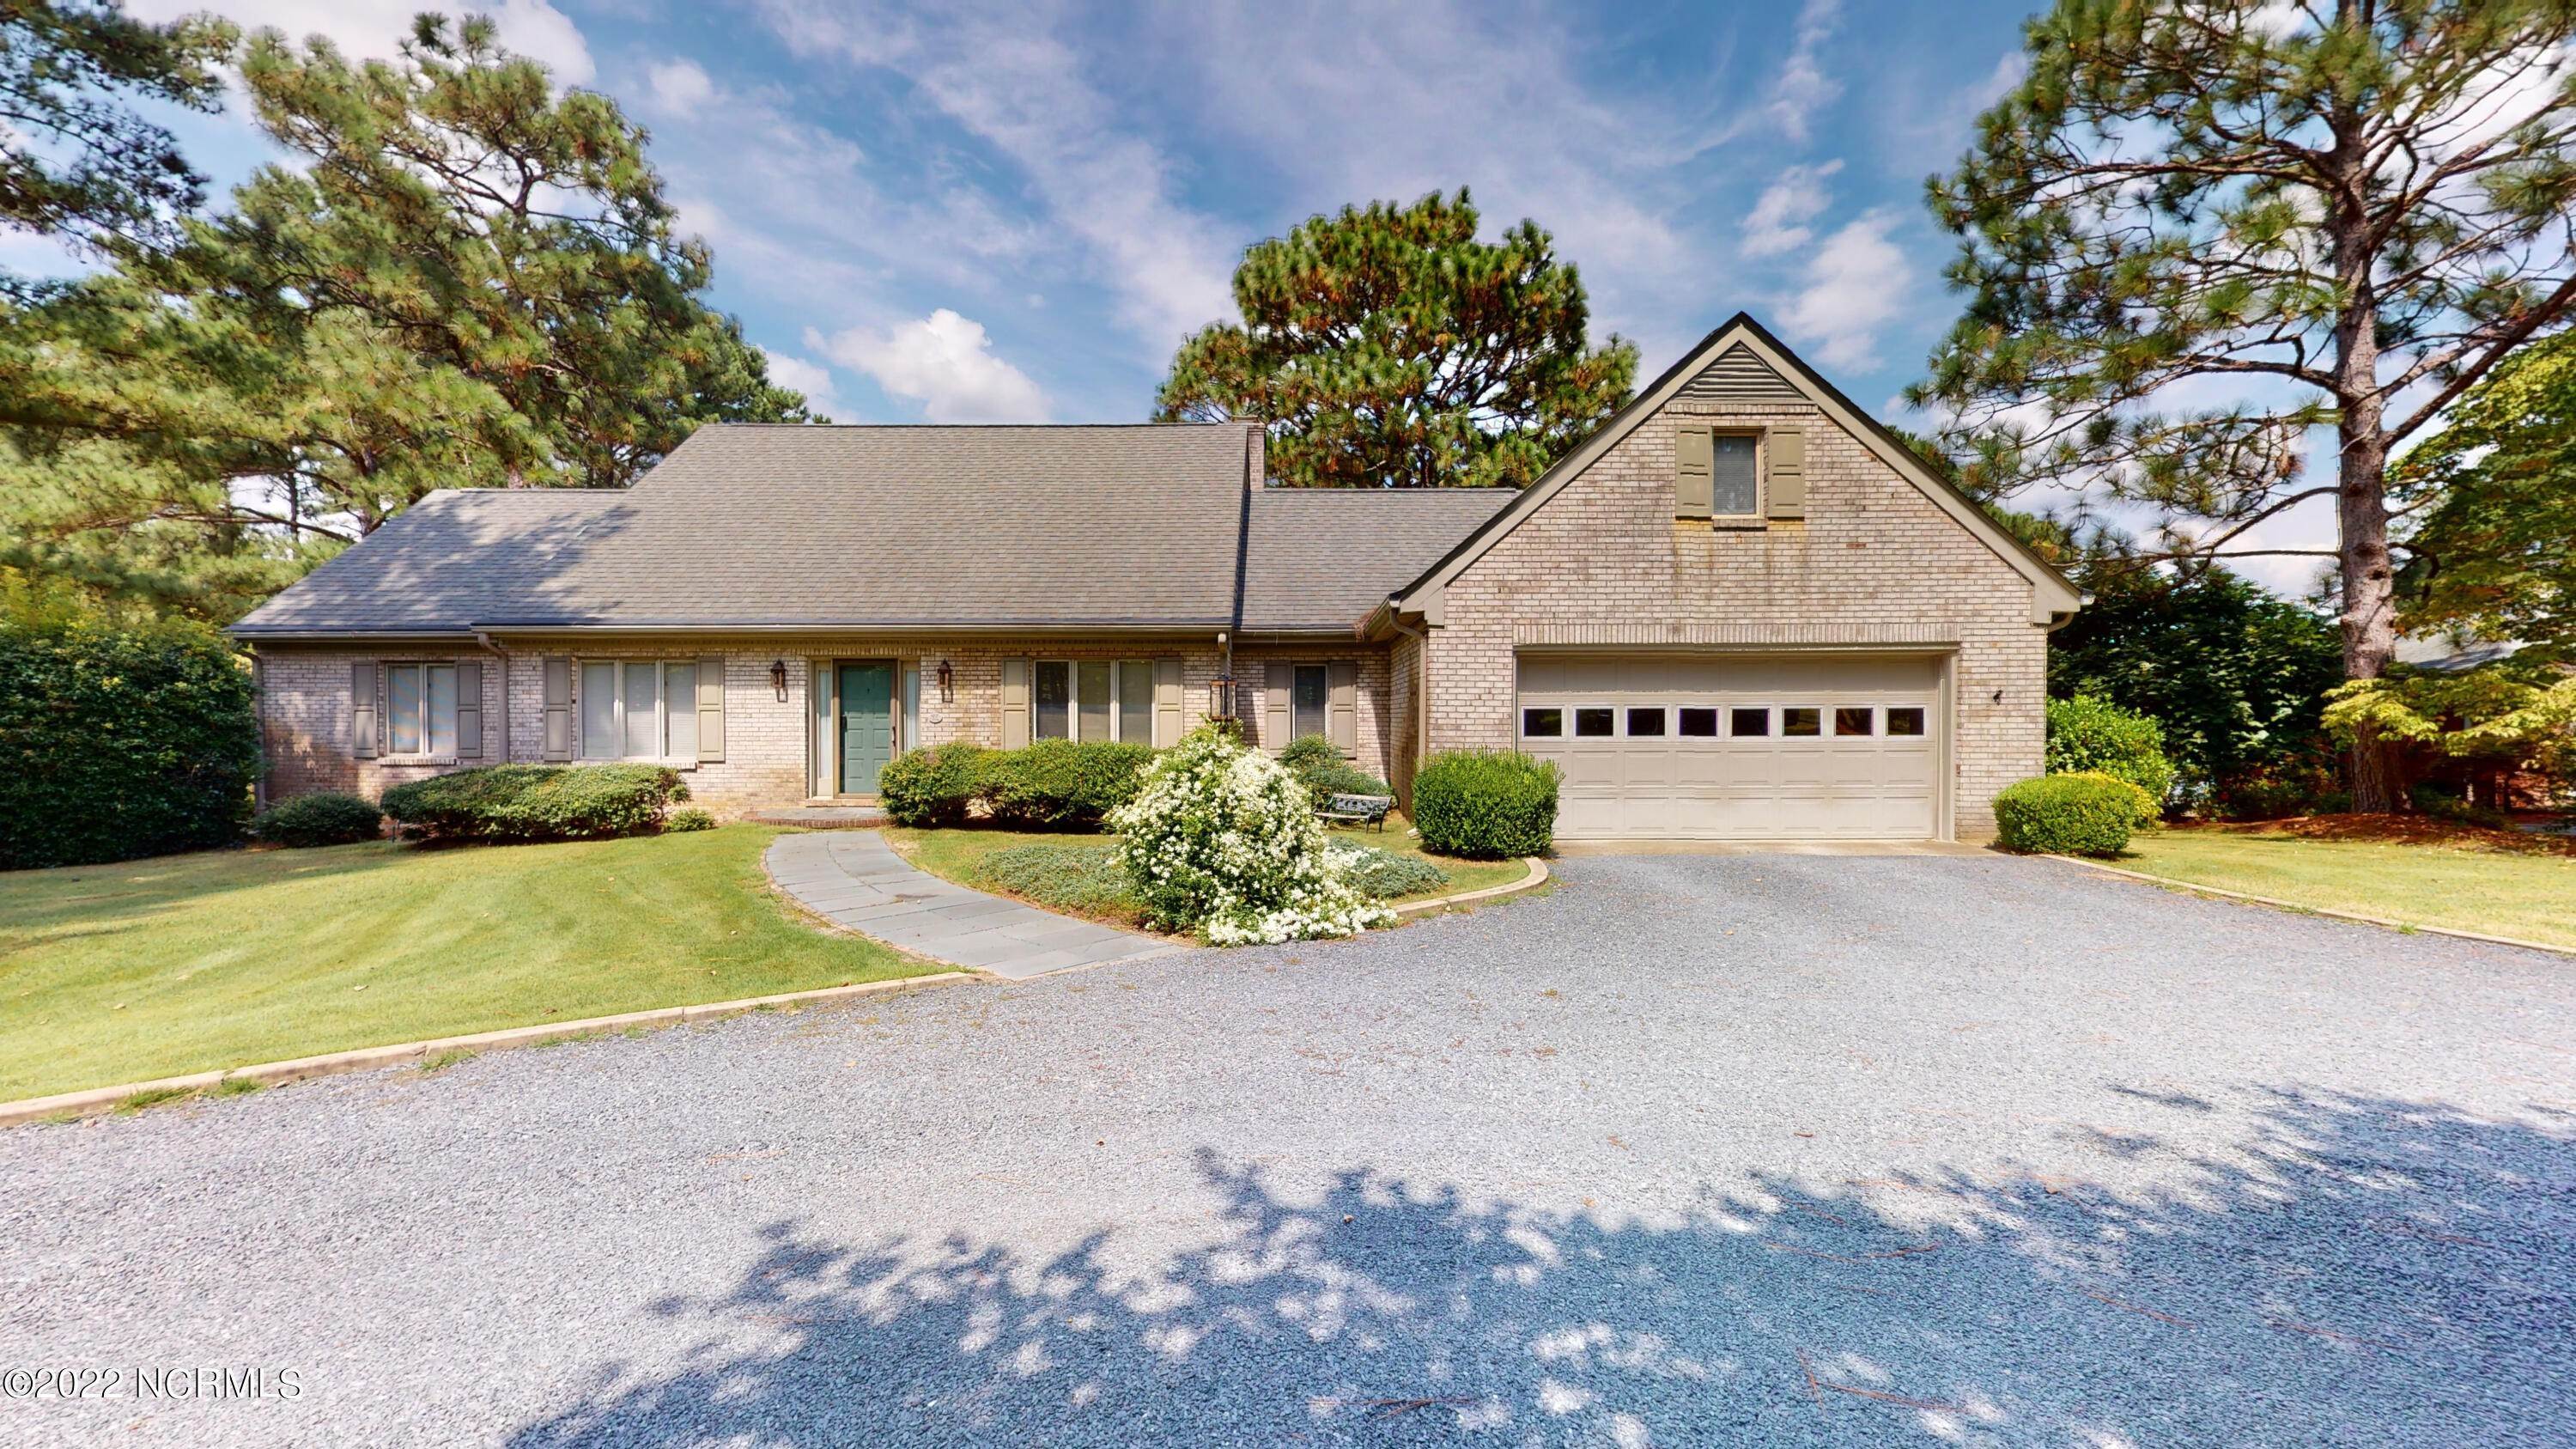 2. Single Family Homes for Sale at 19 Shadow Drive Whispering Pines, North Carolina 28327 United States